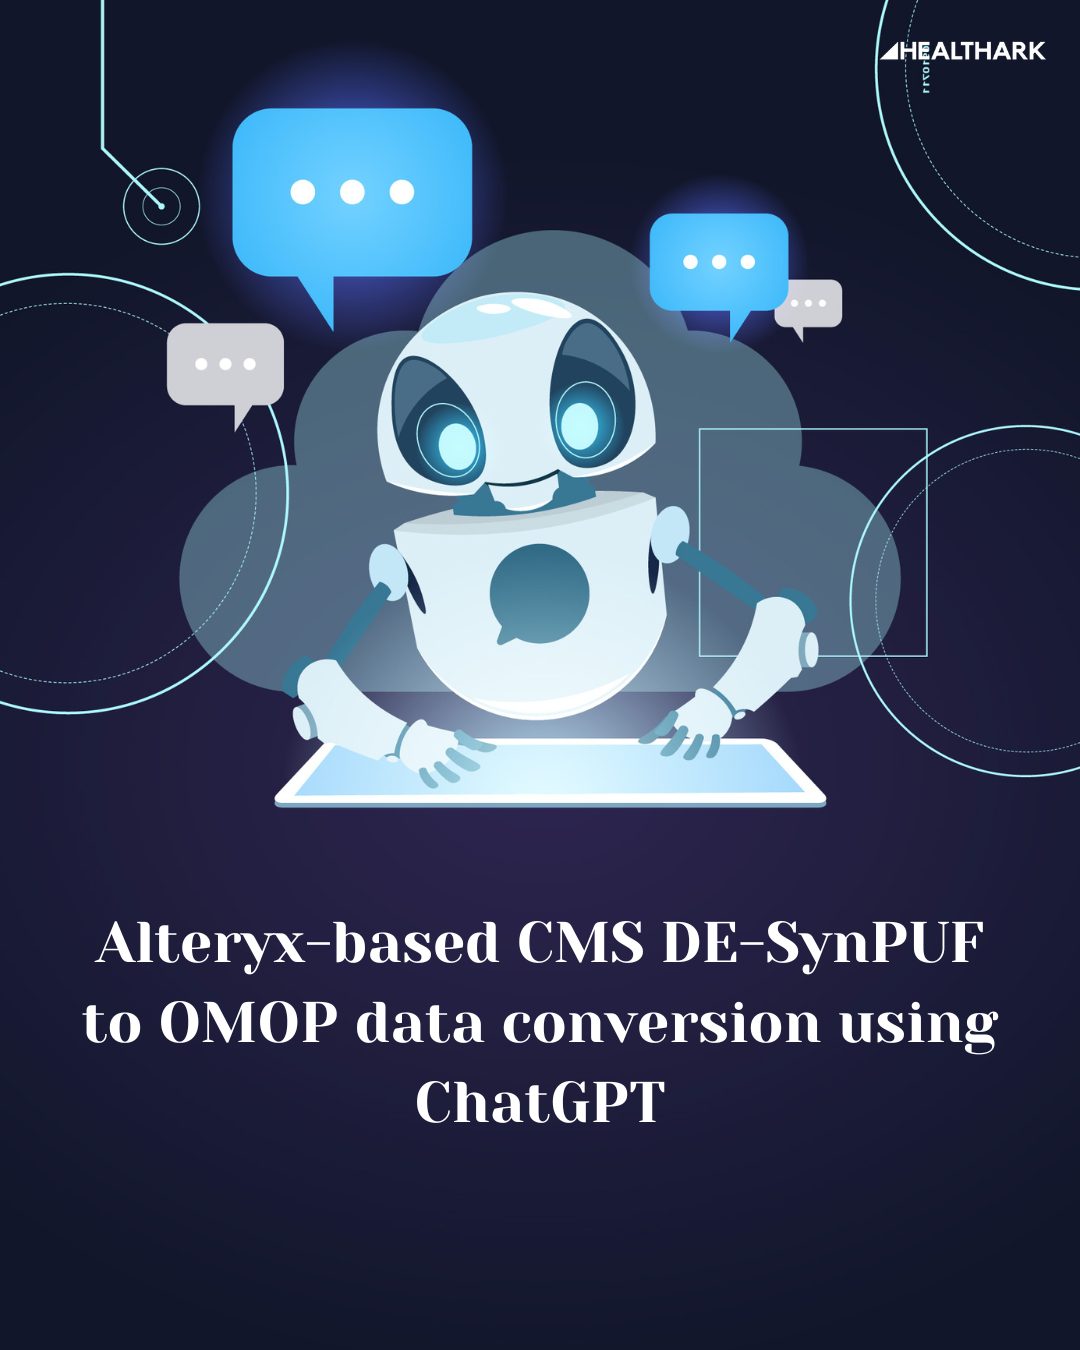 Alteryx-based CMS DE-SynPUF to OMOP data conversion using ChatGPT